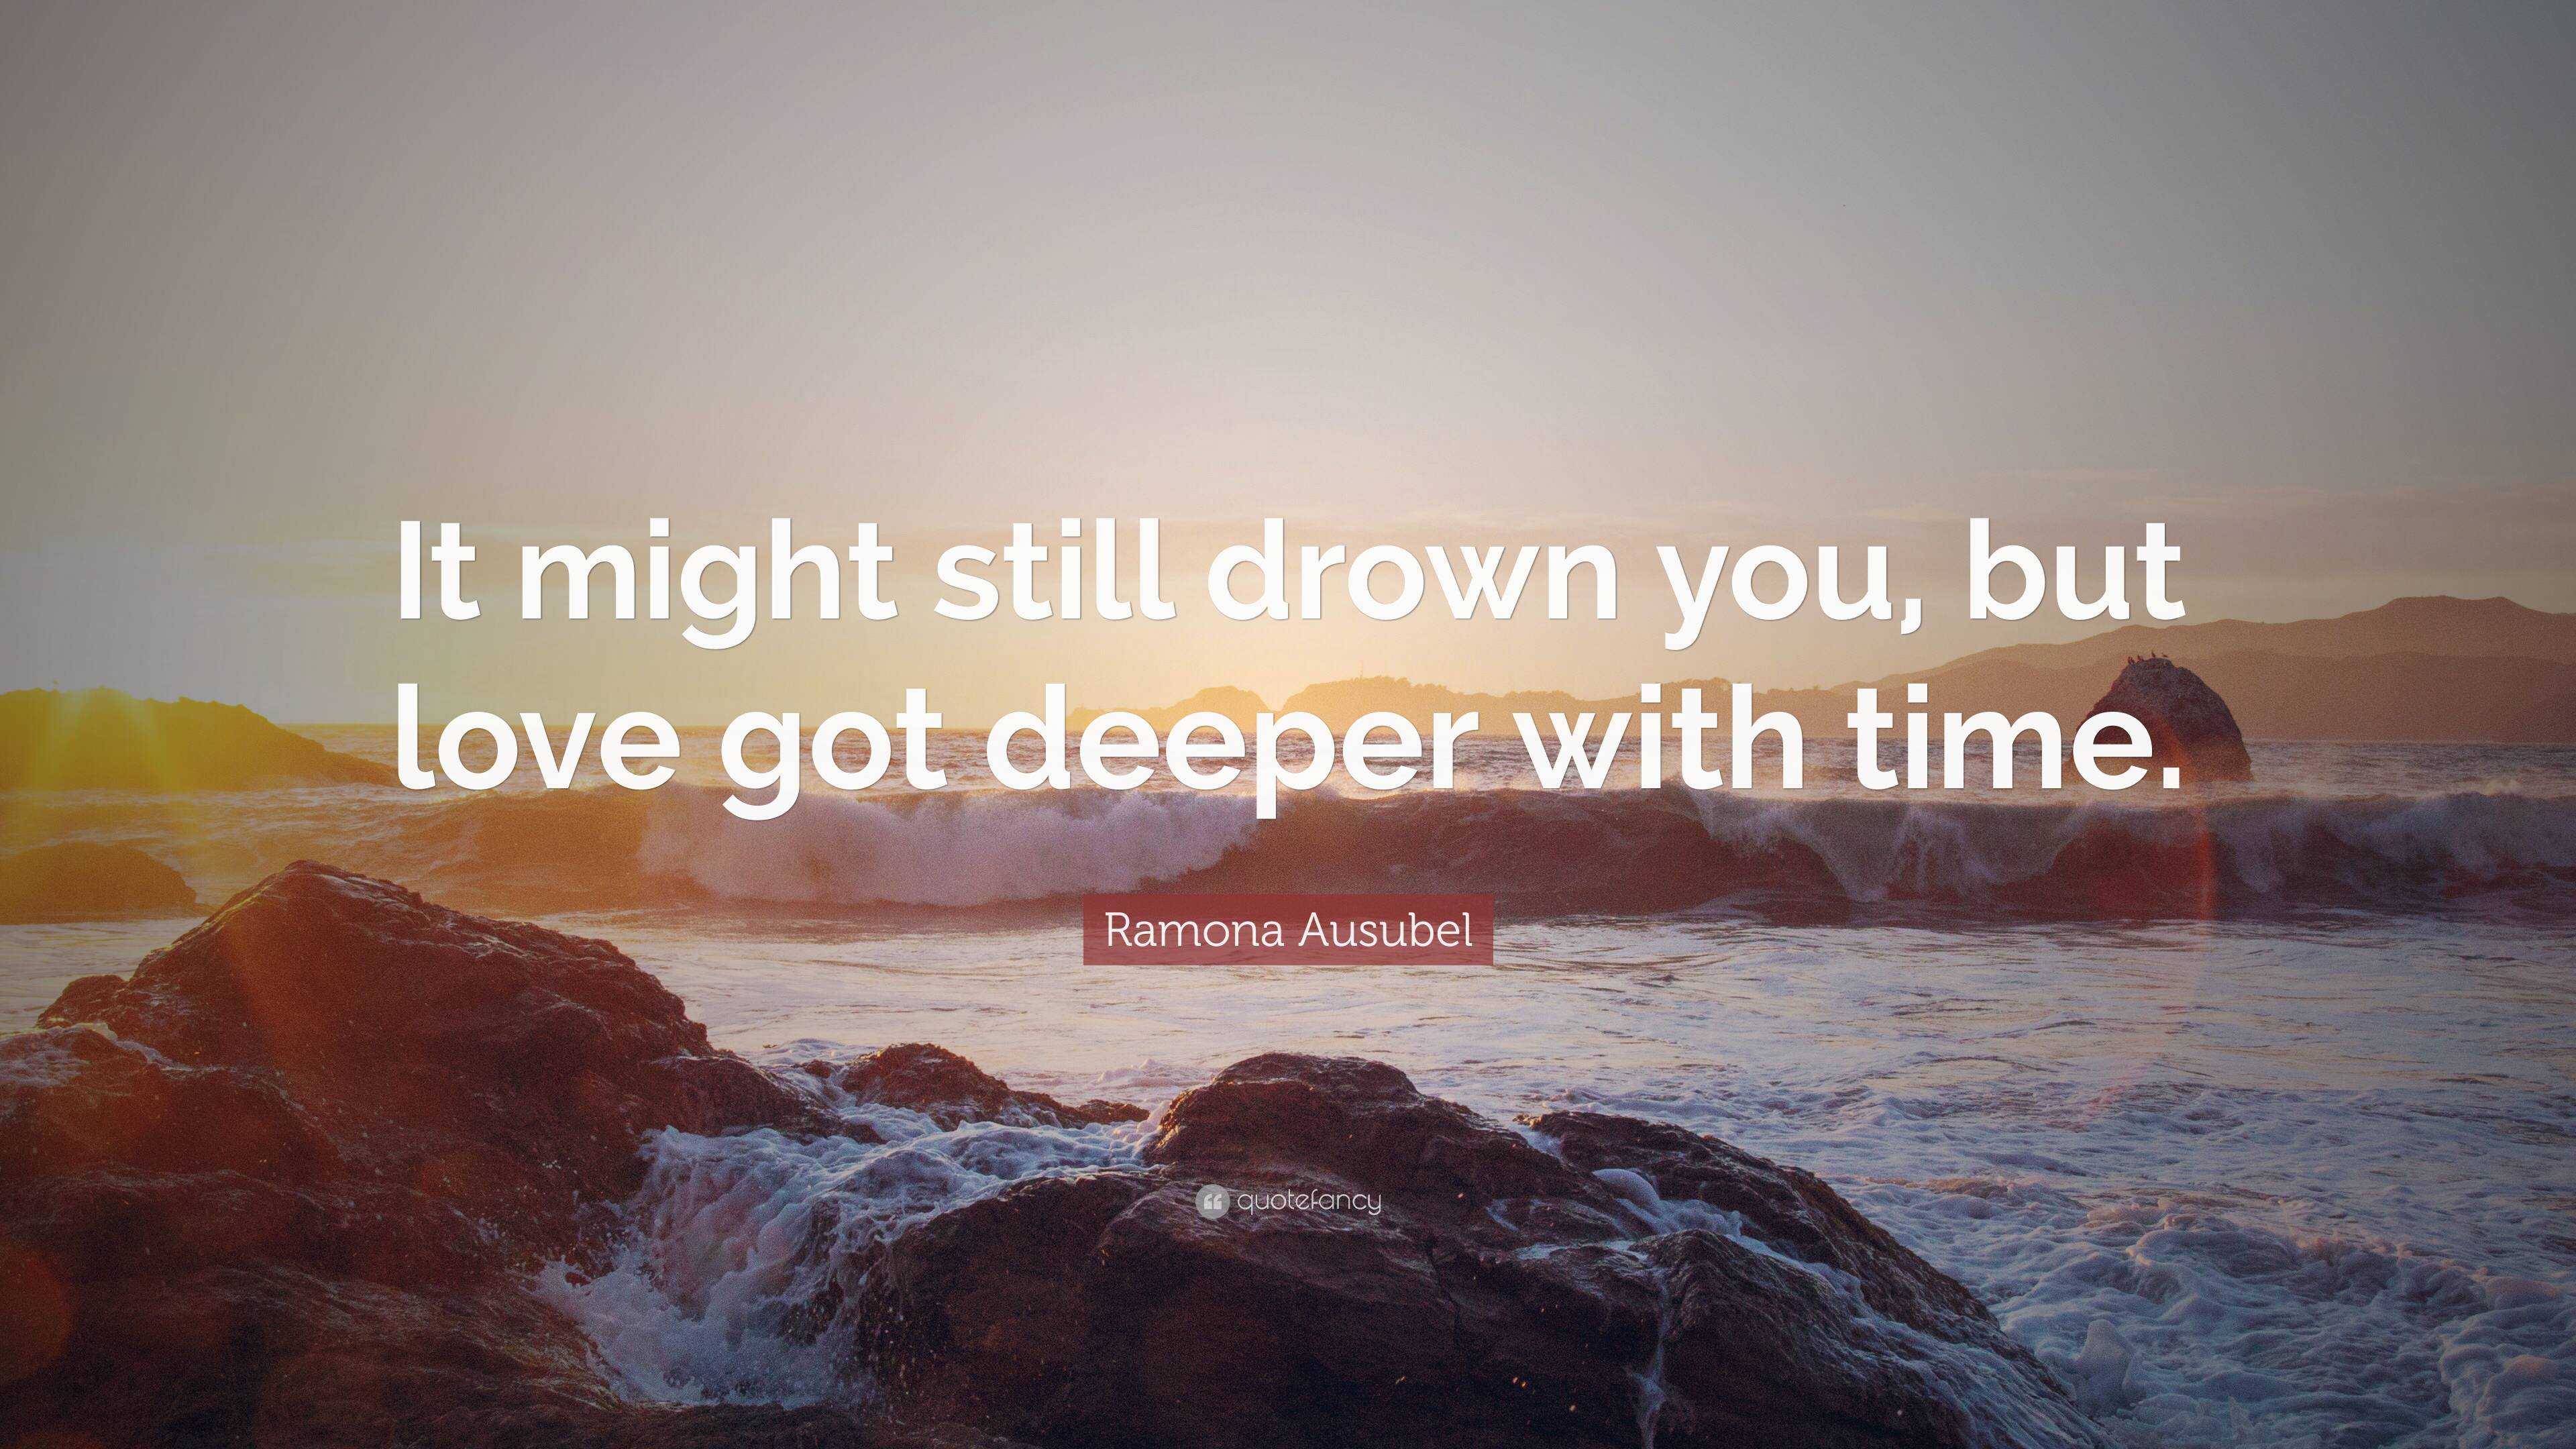 Ramona Ausubel Quote: “It might still drown you, but love got deeper ...